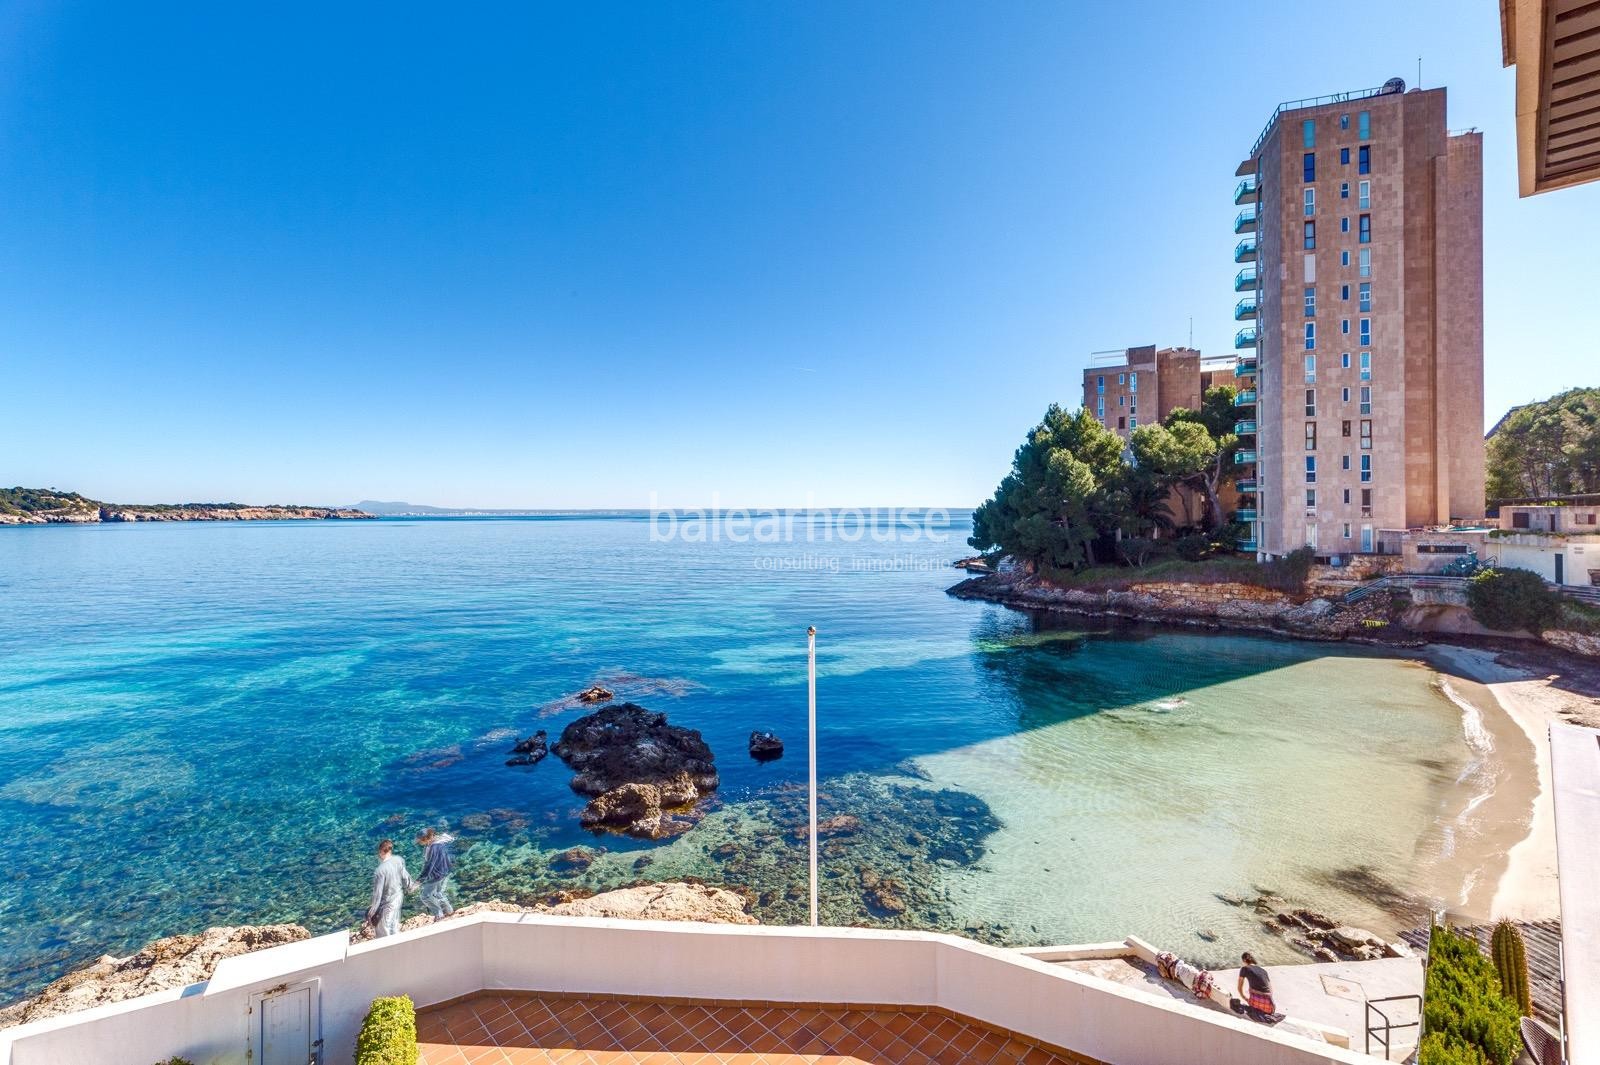 Excellent modern flat with stunning sea views and direct access to beautiful beaches.